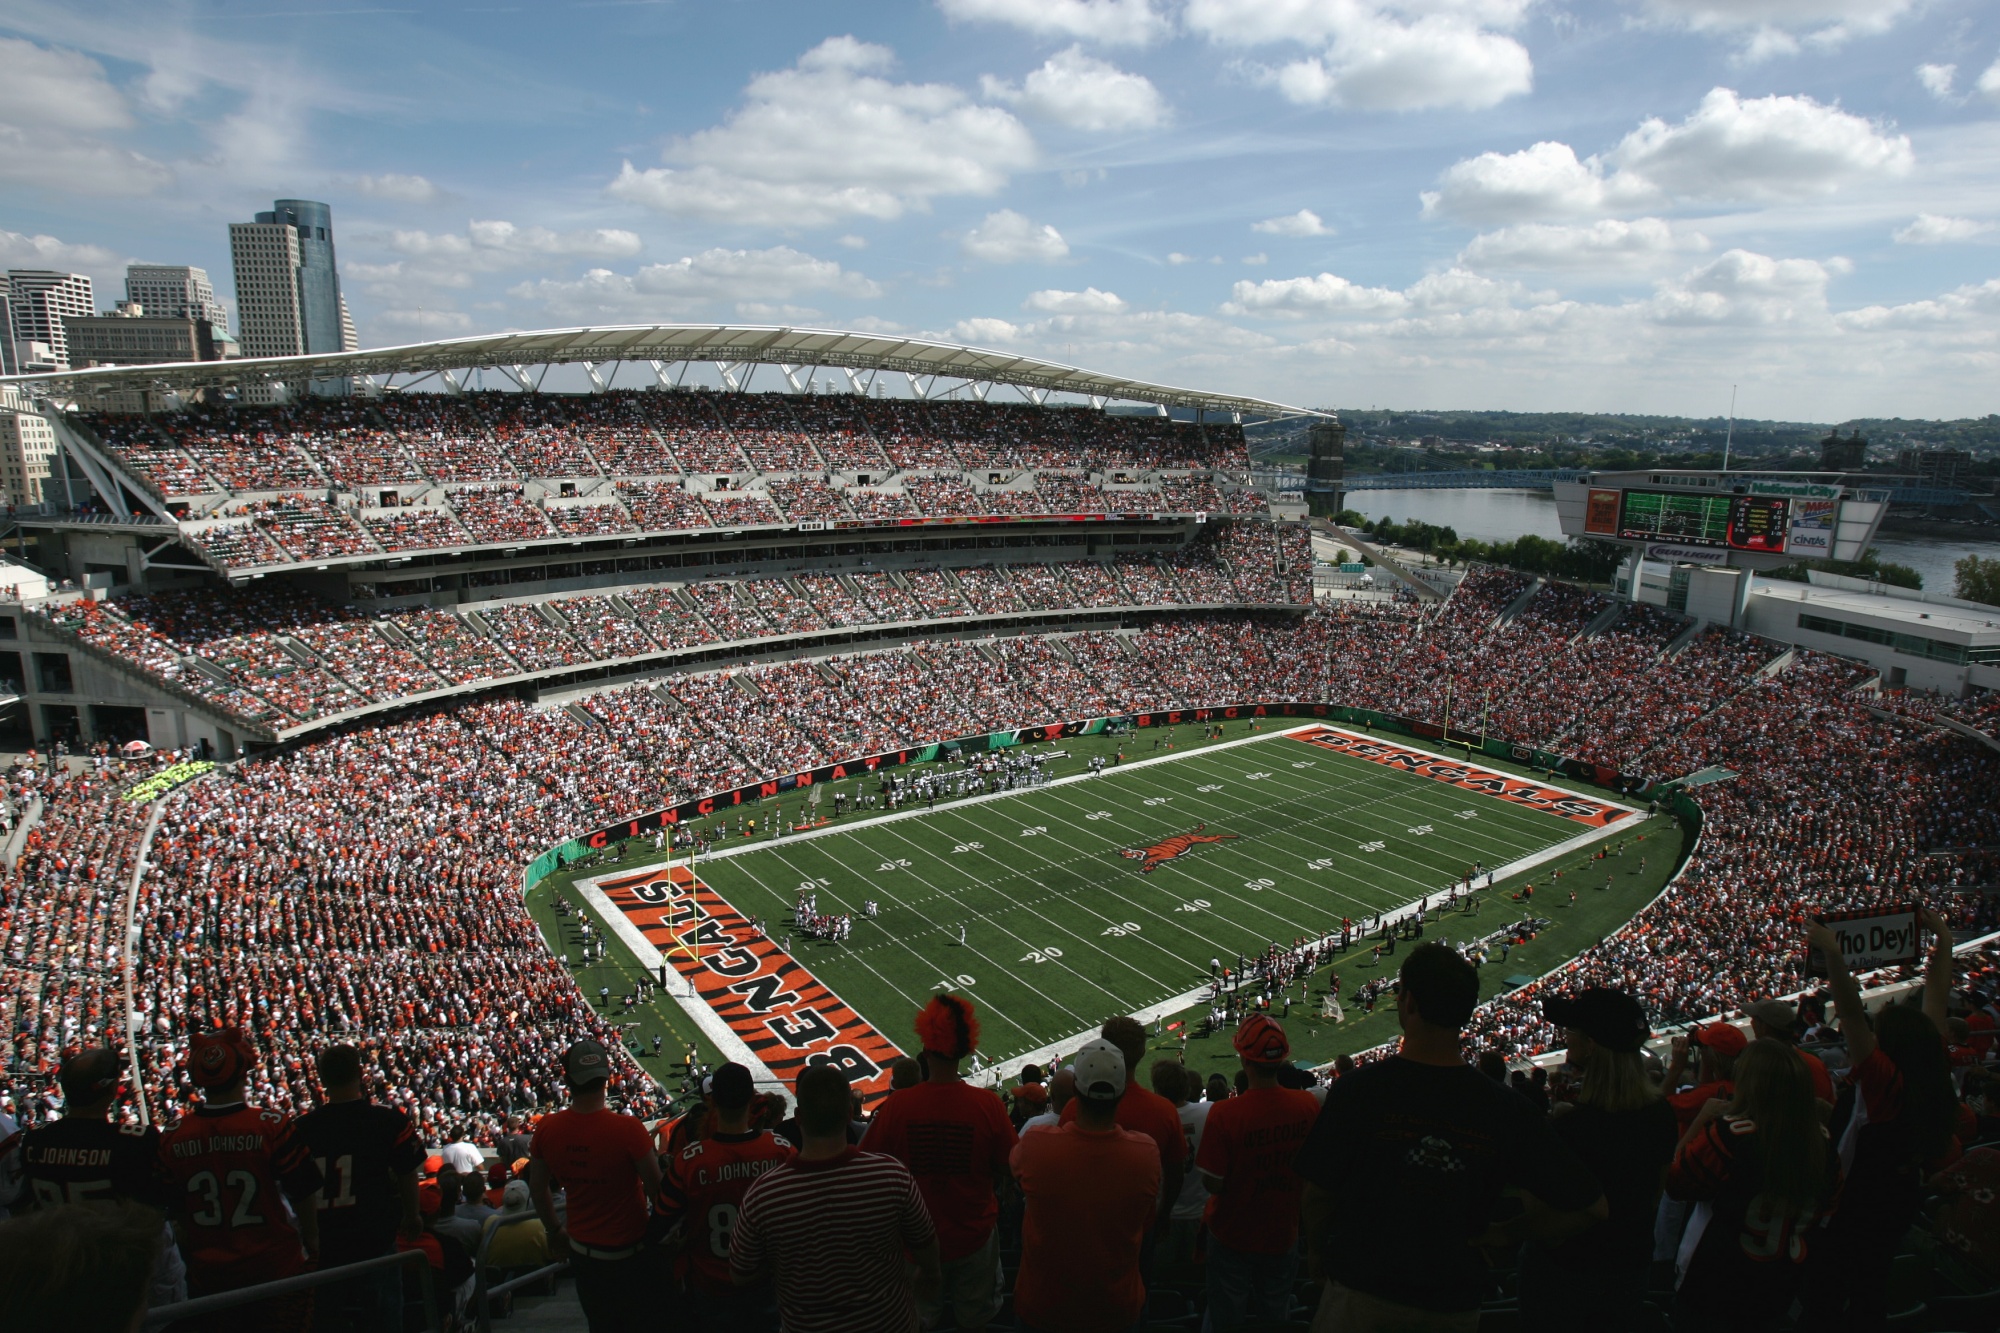 Bengals Stadium Name: Paycor Acquires Rights in 16-Year Deal (PYCR